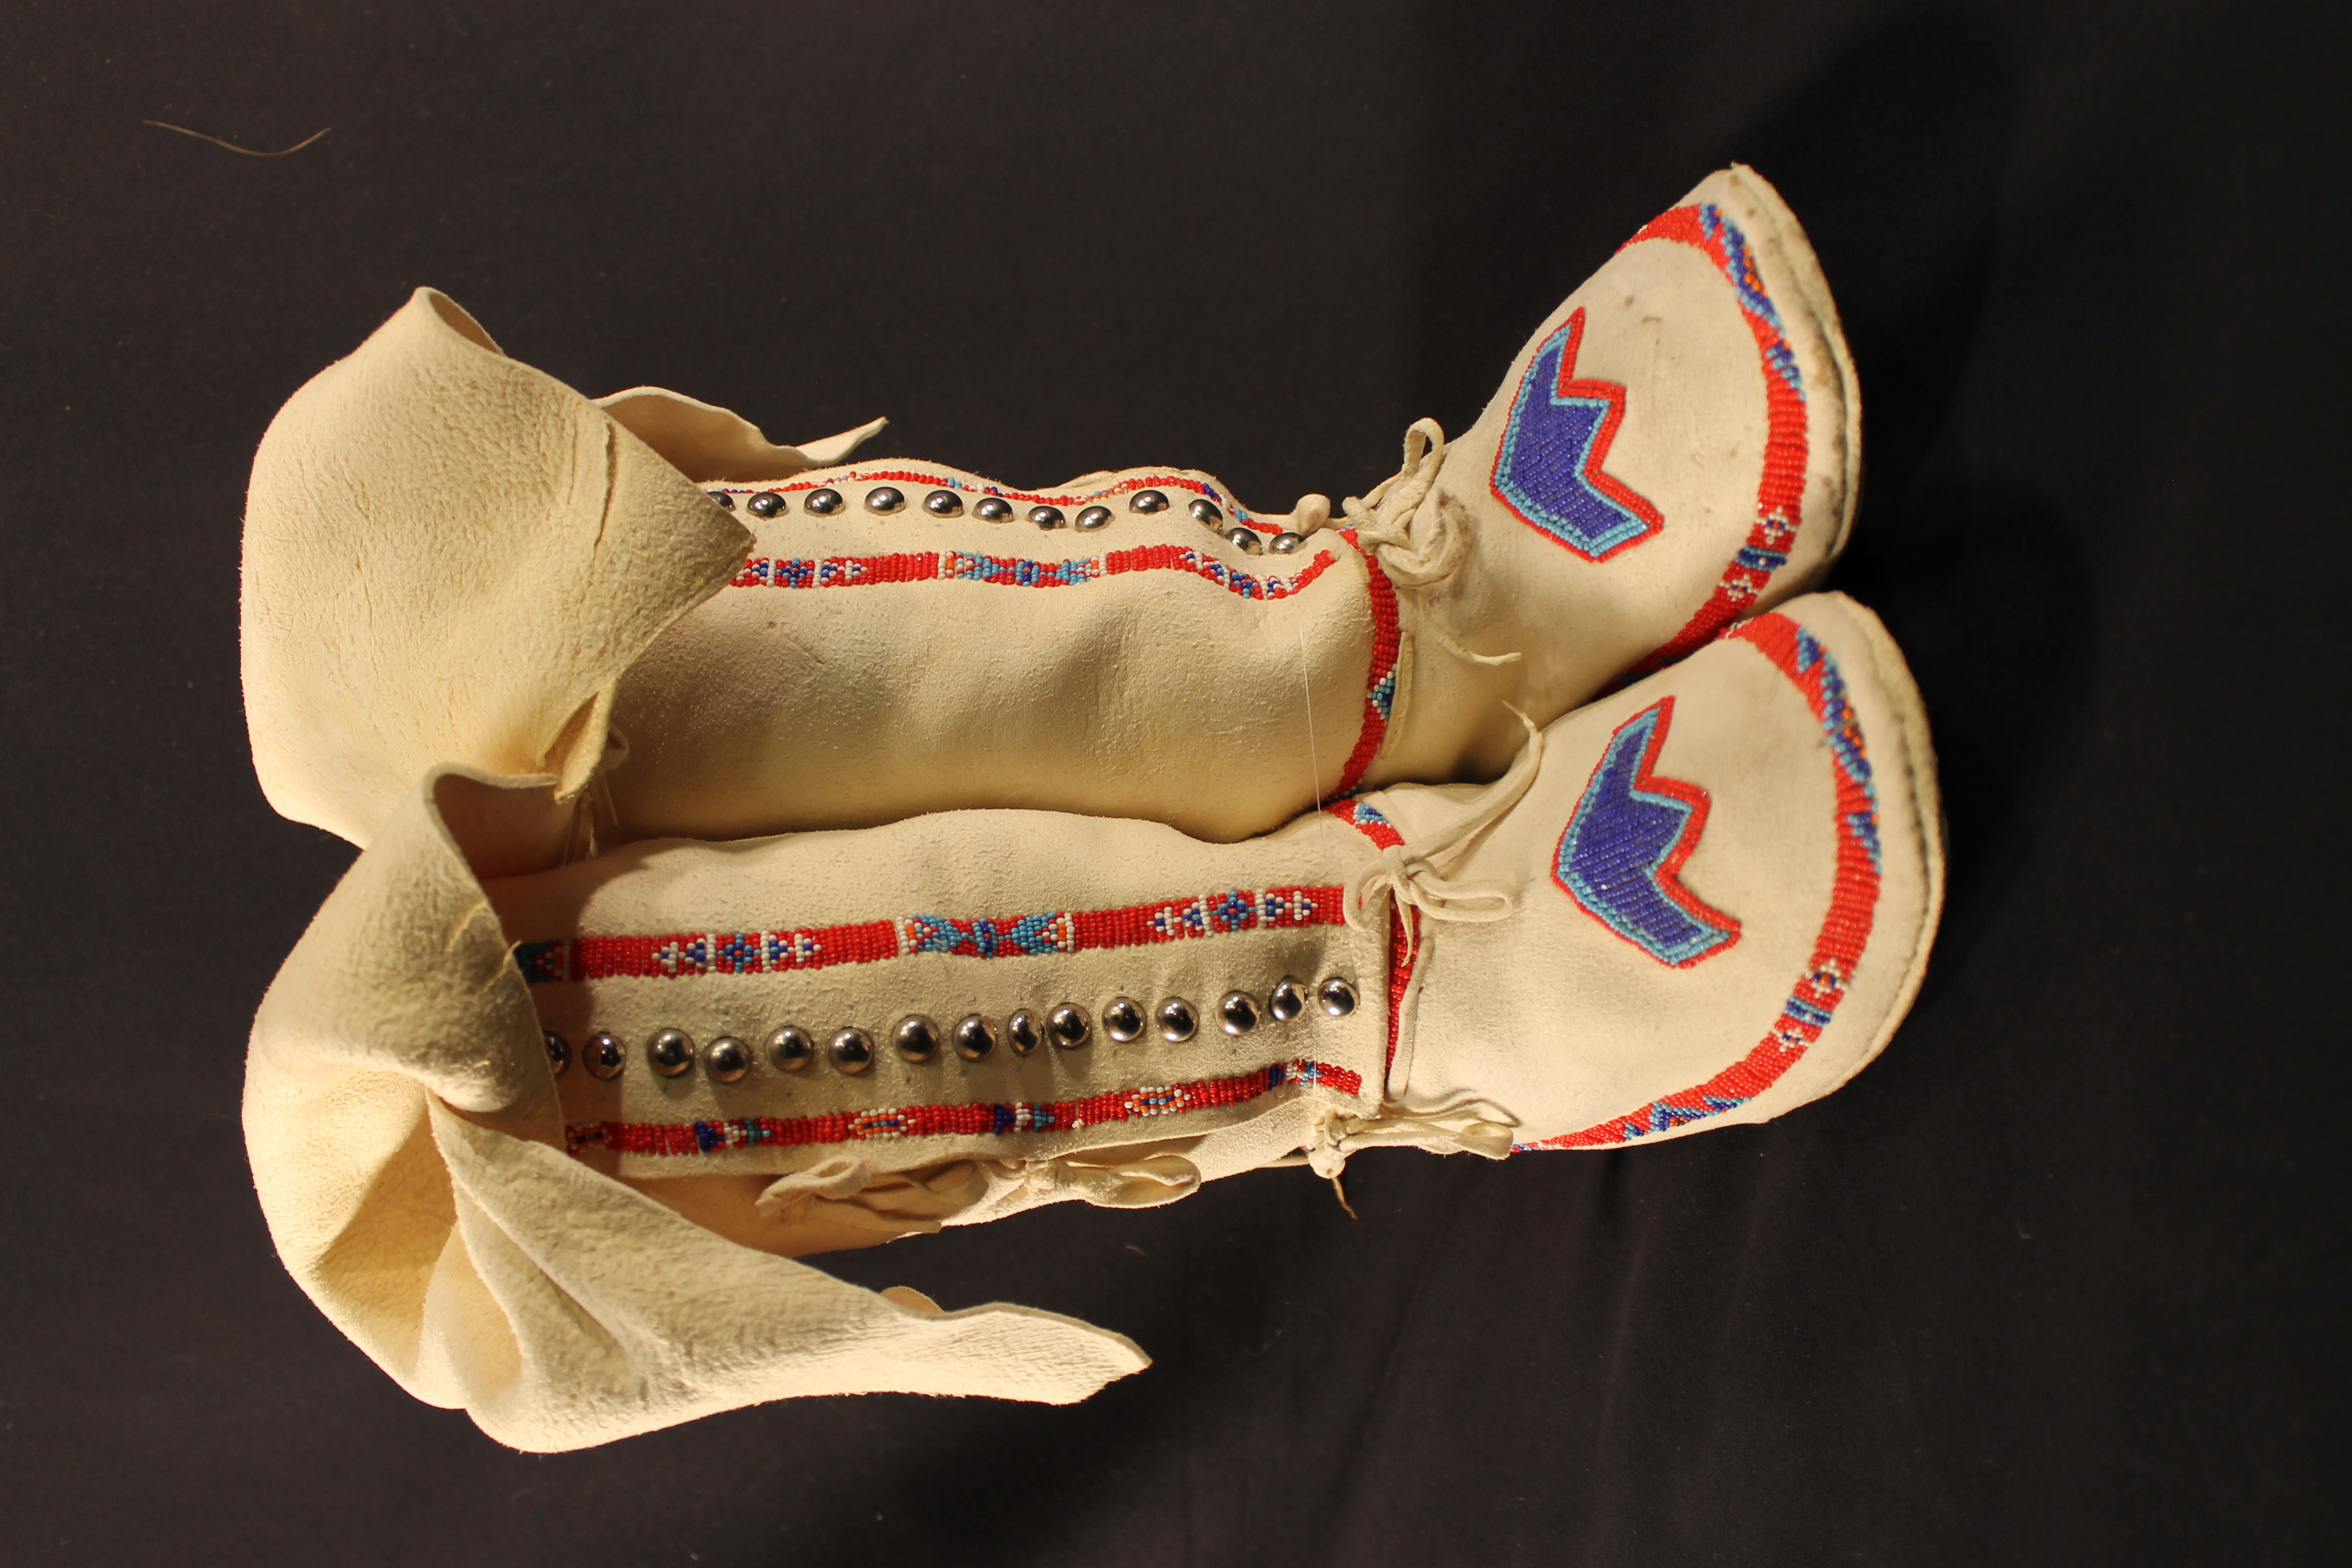 Leather cream-colored moccasin with red, blue, white beadwork. Silver metal studs run down the center. Blue three-pointed geometric beaded design on the toe of the foot.